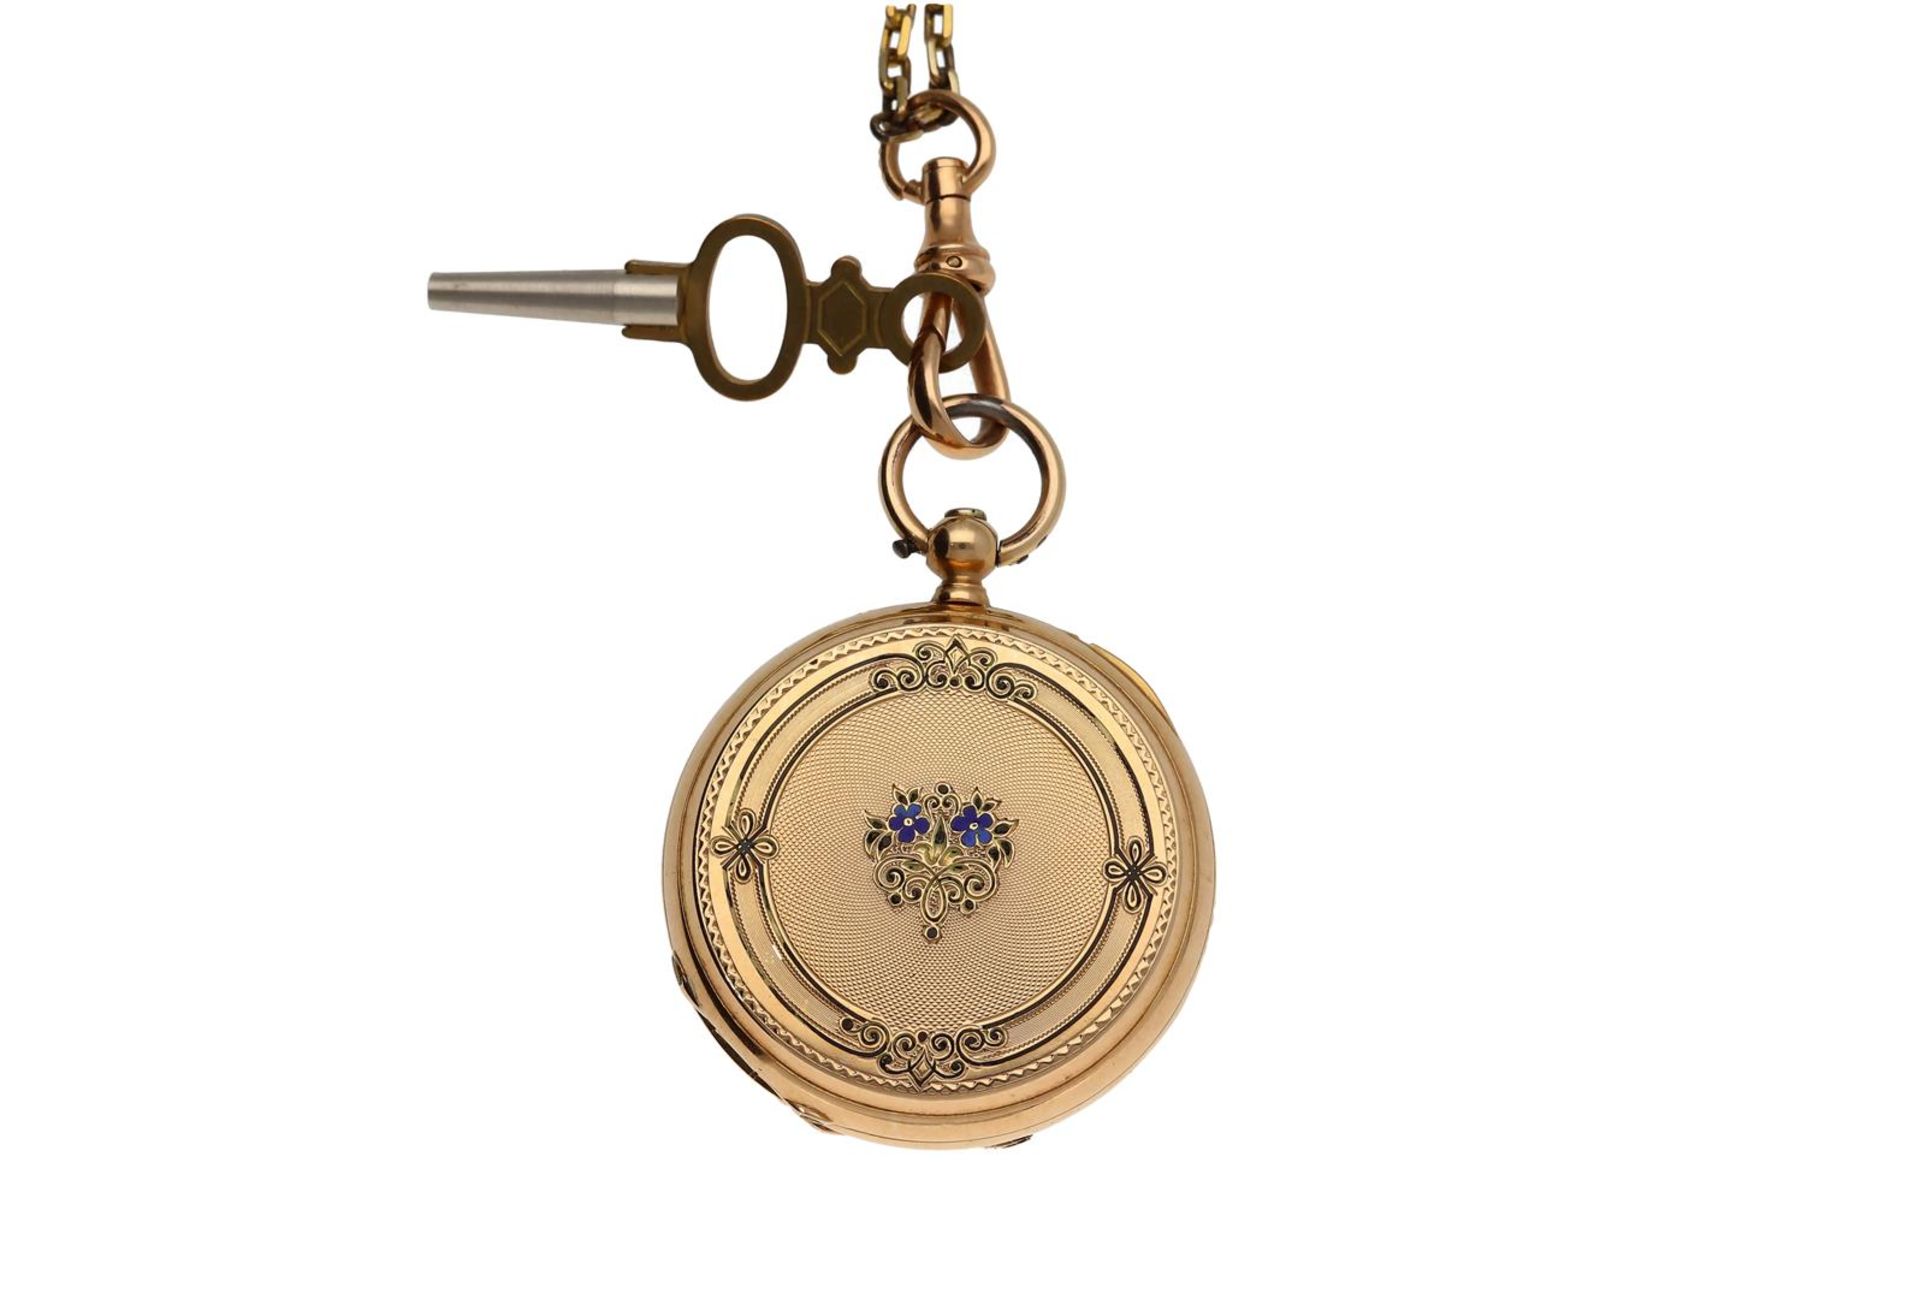 A 14-kt gold ladies remontoir pocket watch on a gold chain, Peret et fils, the engraved case with mo - Image 8 of 9